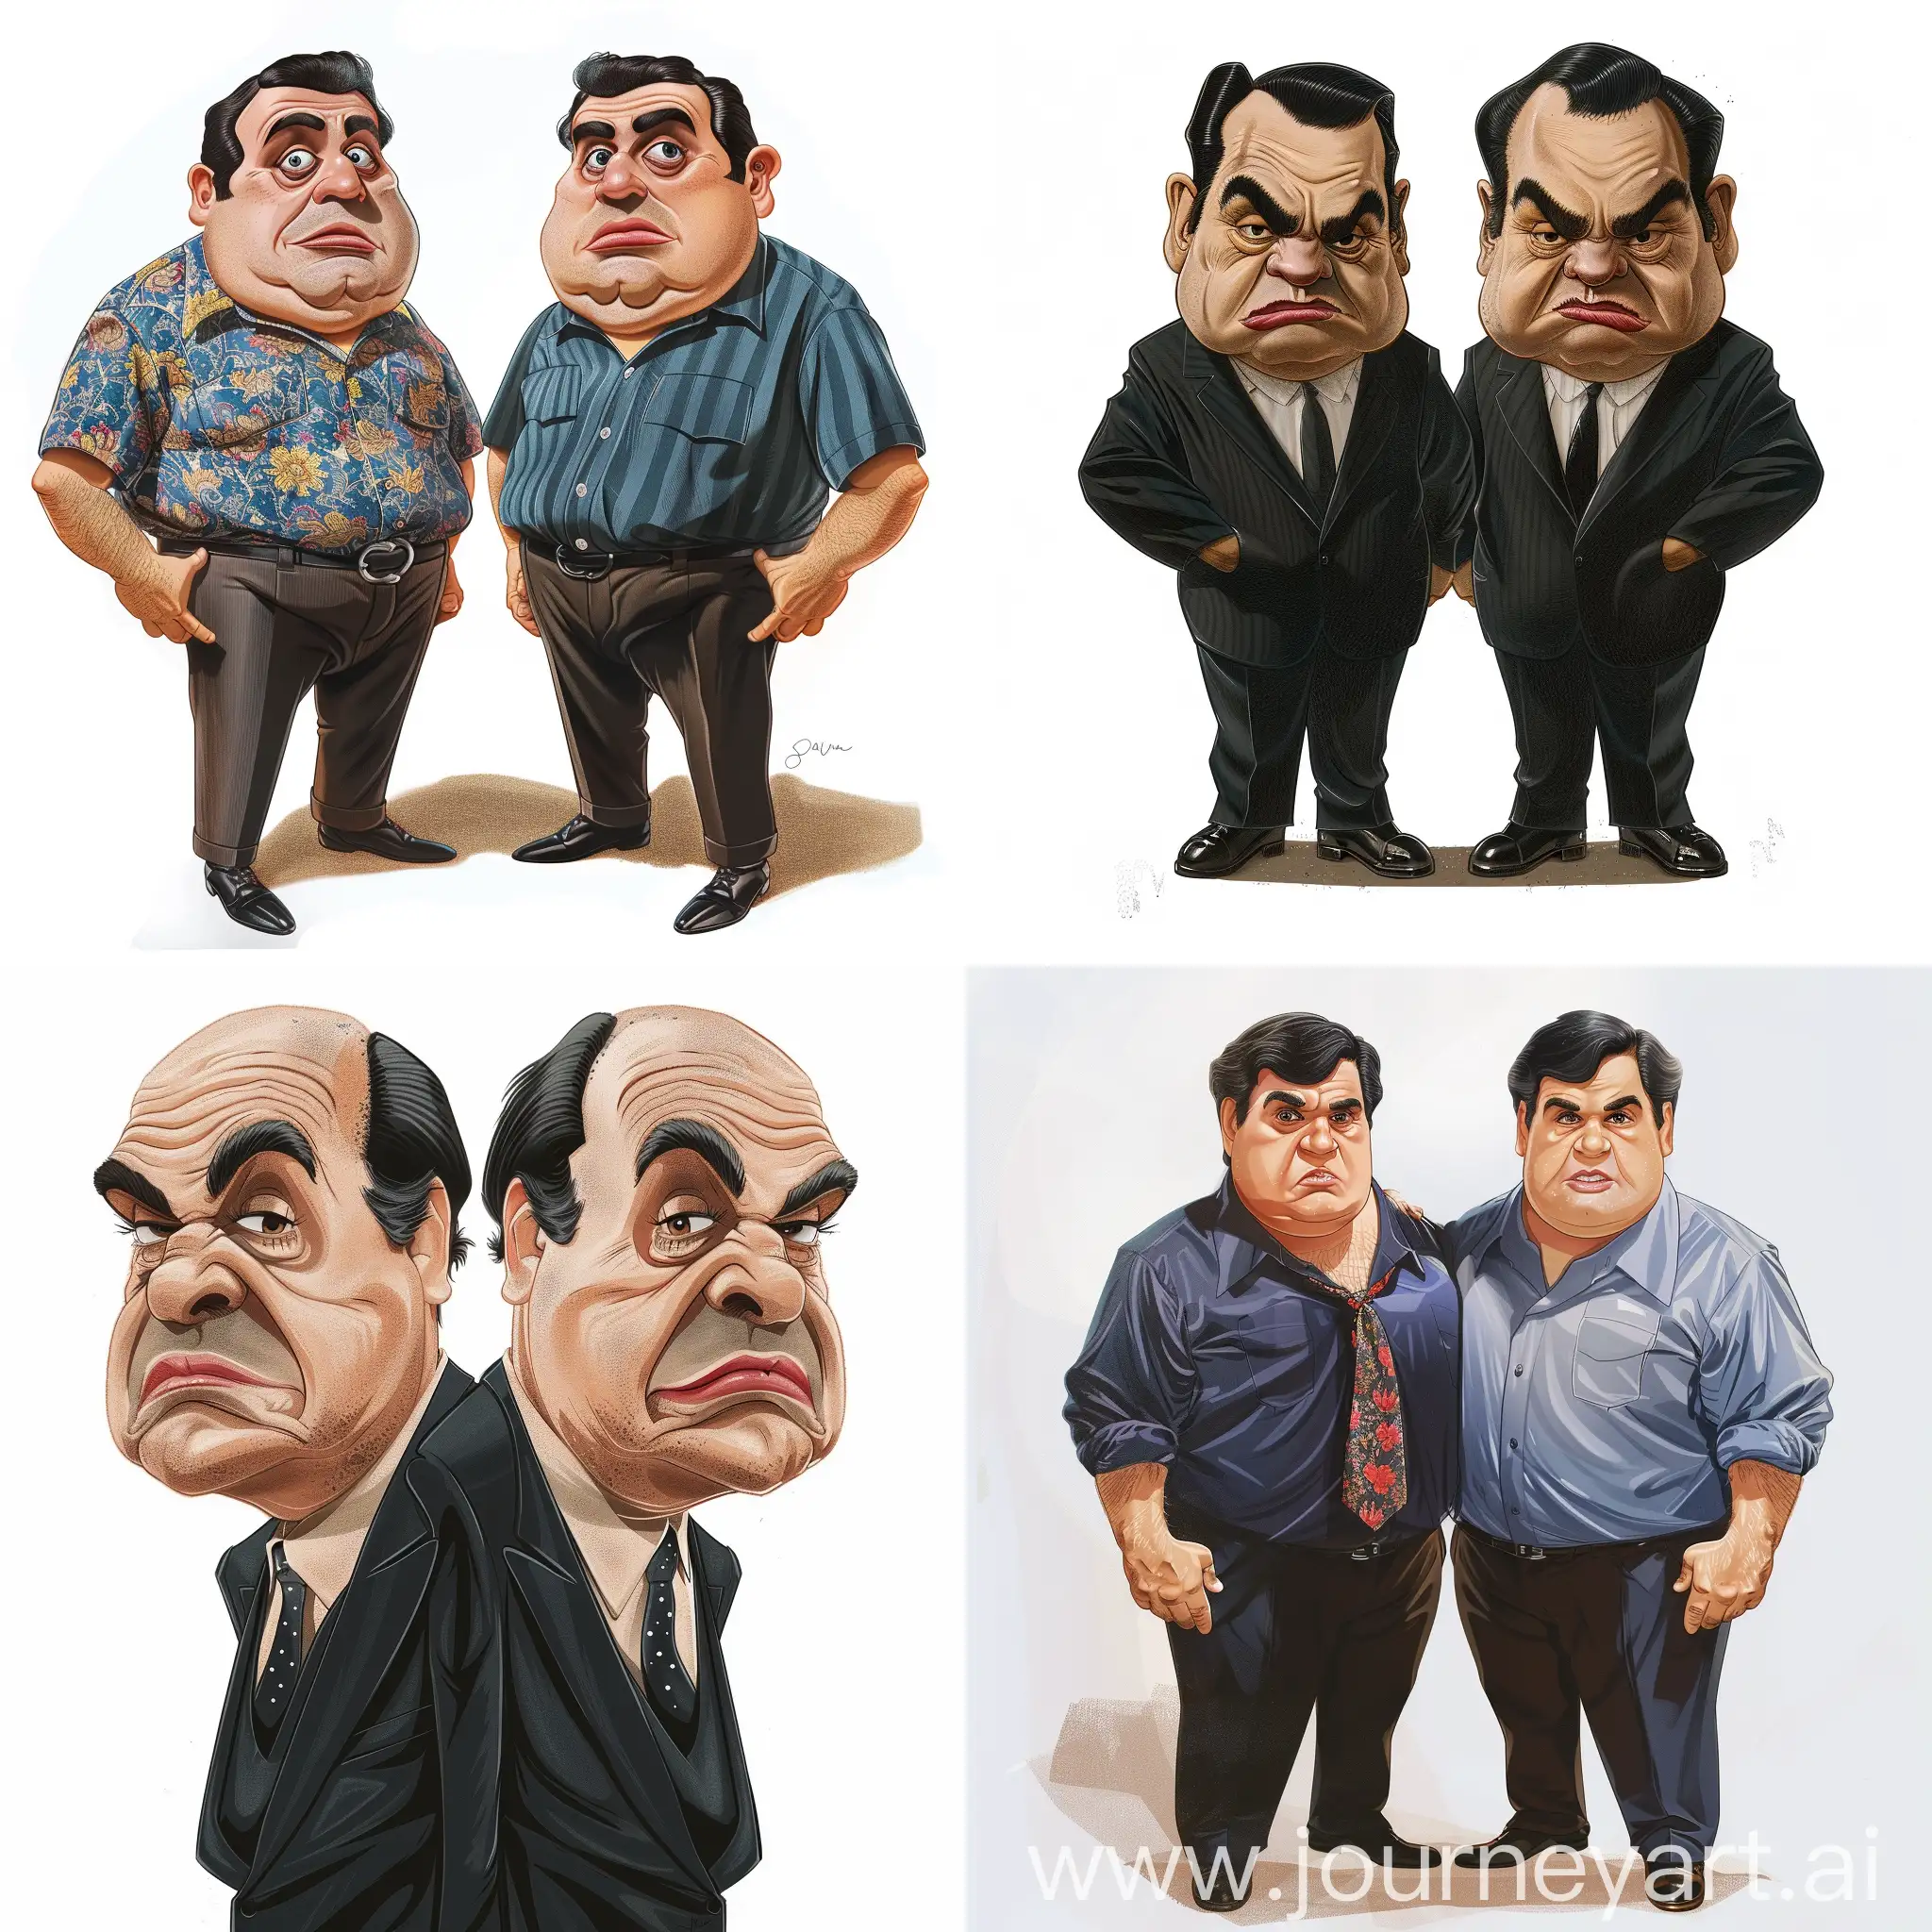 Whimsical-Caricature-Illustration-of-Danny-DeVitos-Identical-Twin